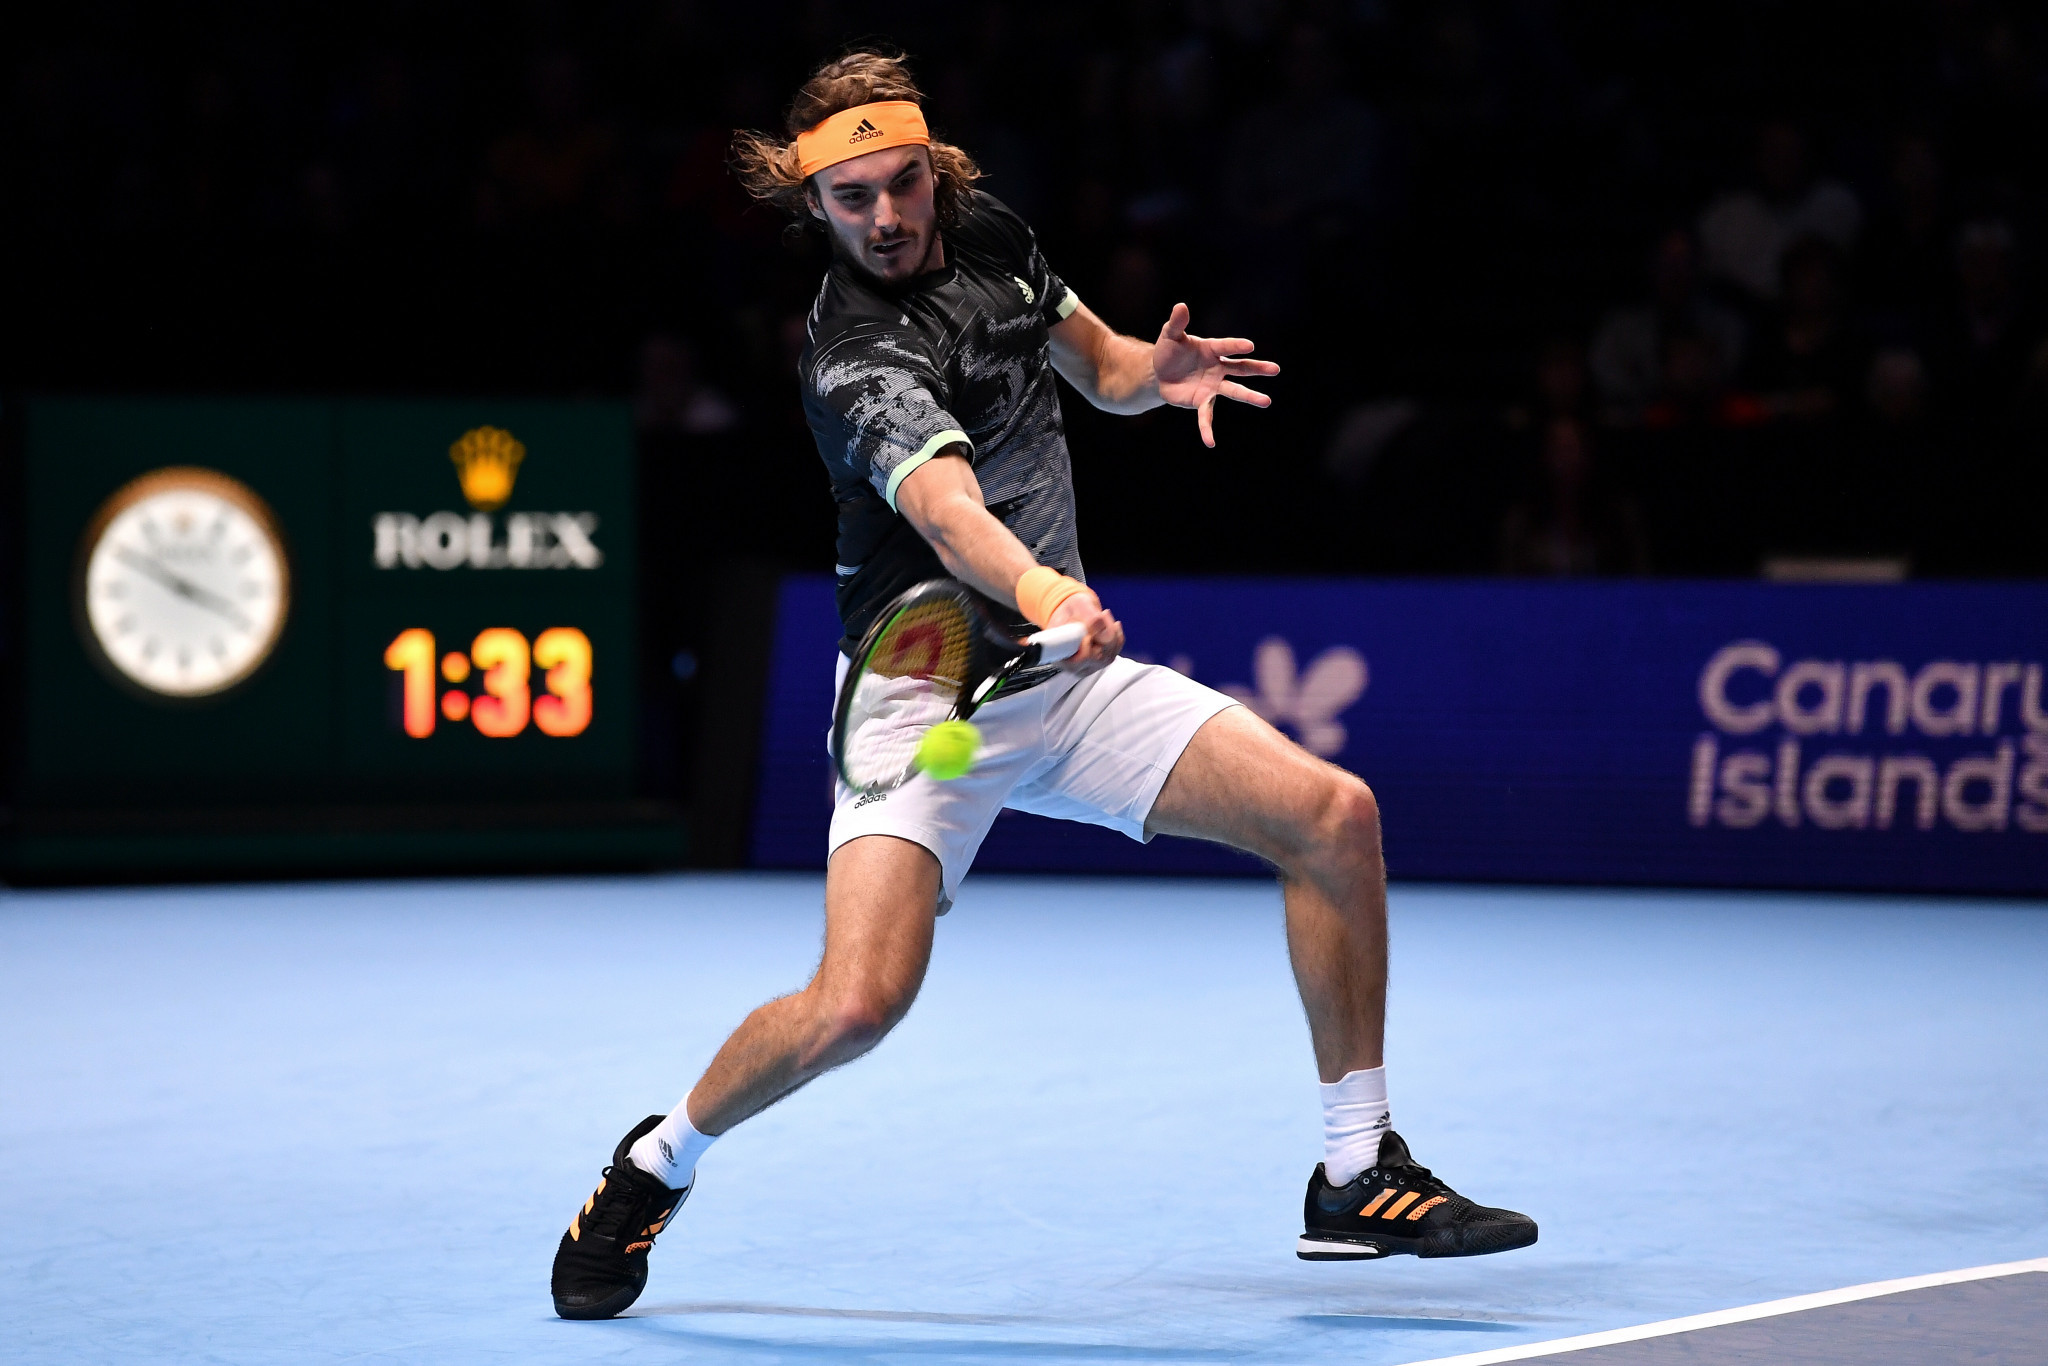 Greece's Stefanos Tsitsipas won his first-ever match at the ATP Finals ©Getty Images